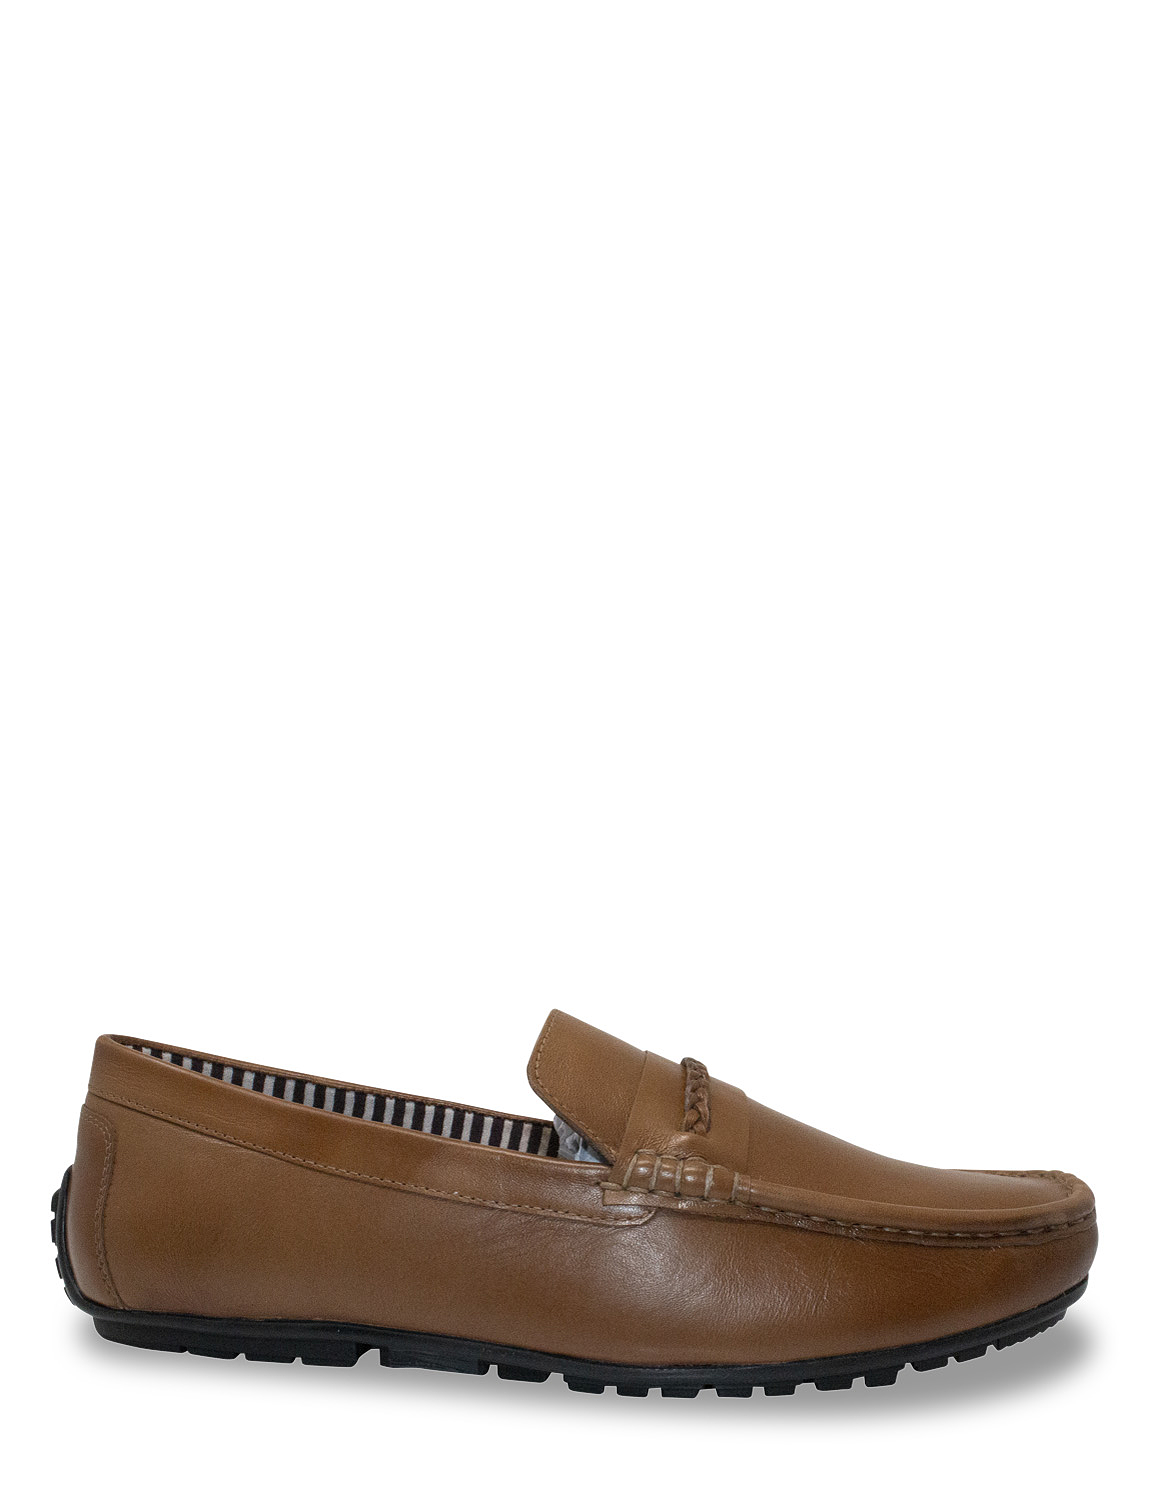 Pegasus Leather Wide Fit Driving Shoes | Chums